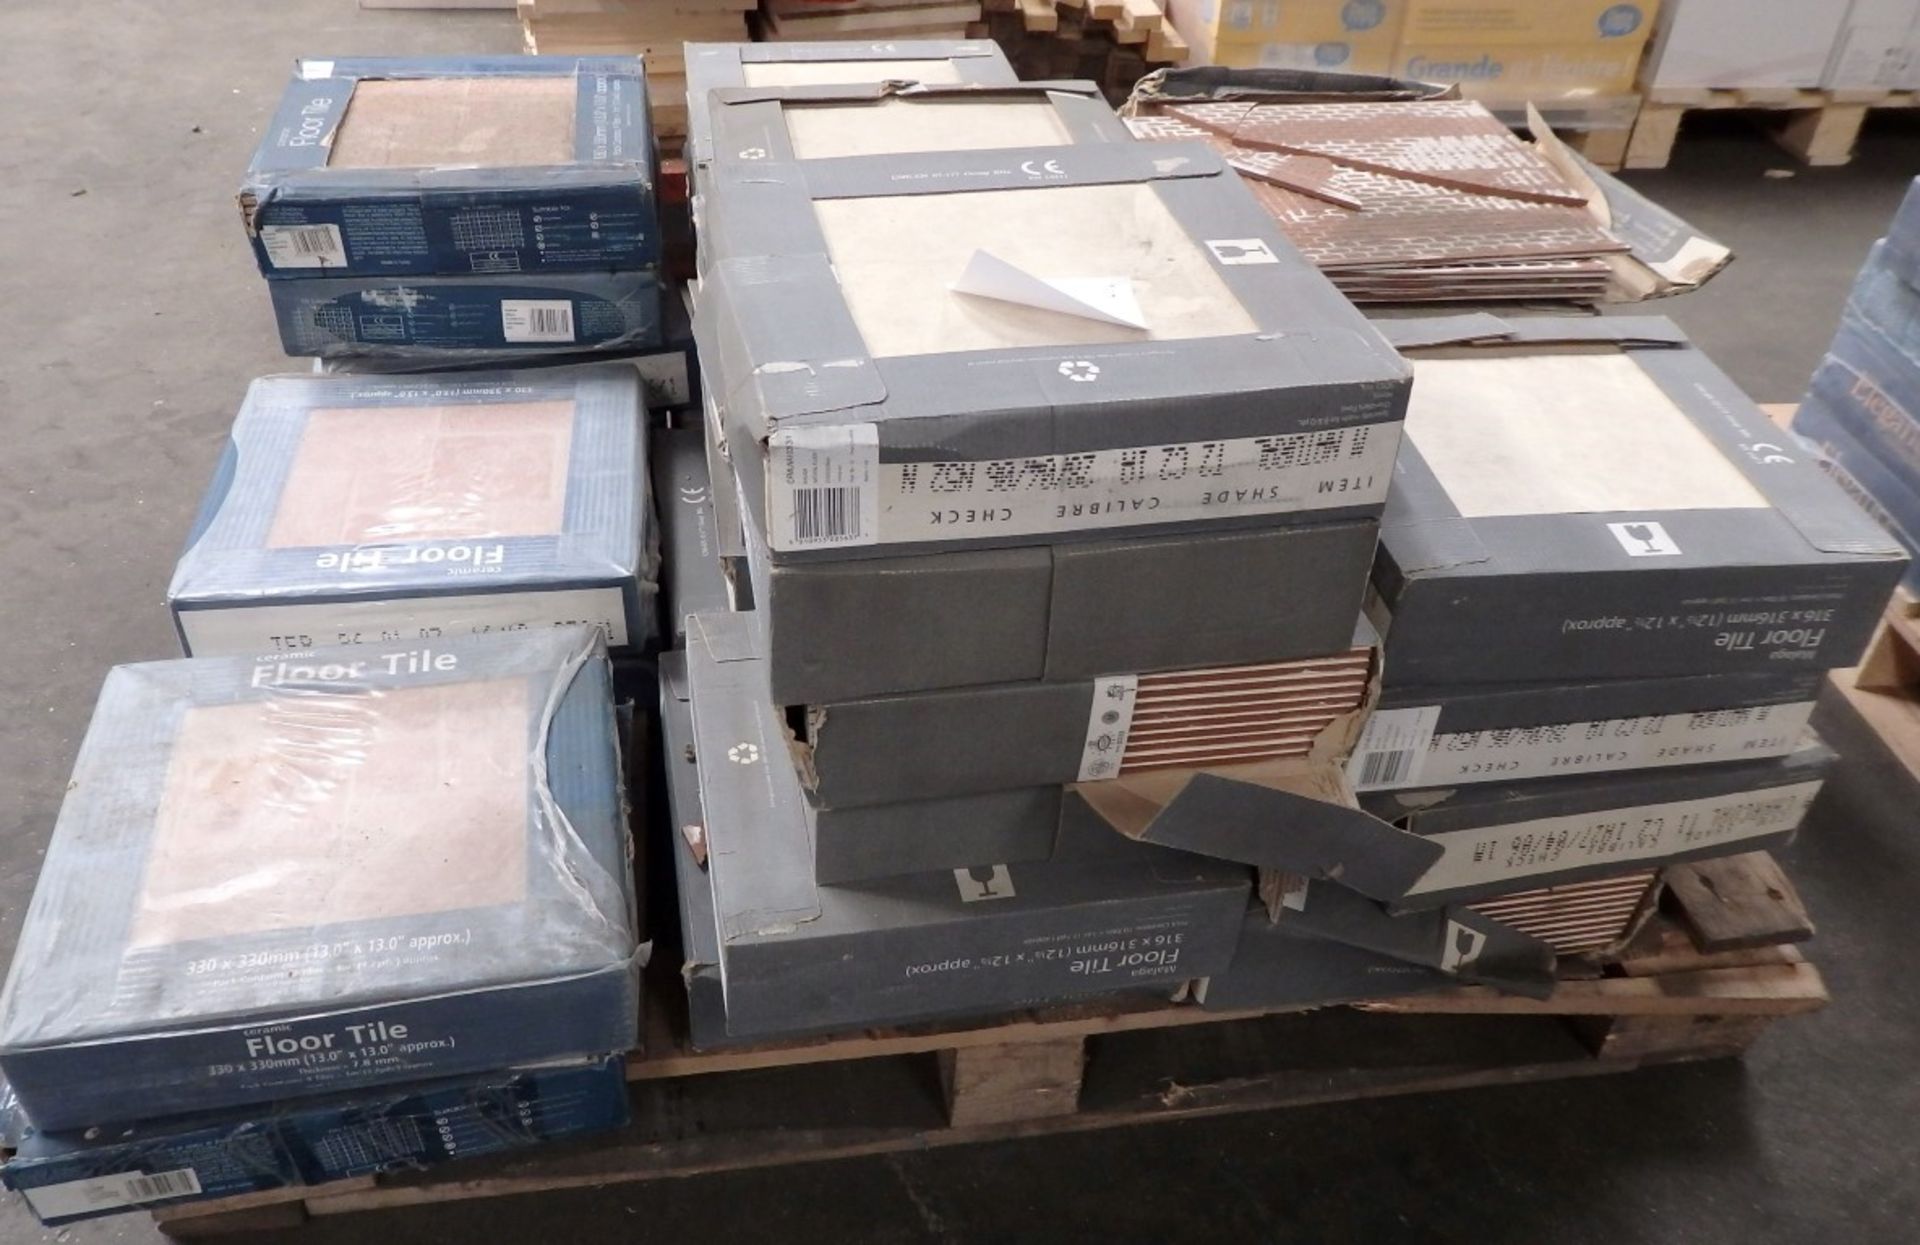 Approx 35 Boxes of Ceramic Floor Tiles - 330x330mm Floor Tiles - Each Pack Contains 9 Tiles - Ref - Image 4 of 4